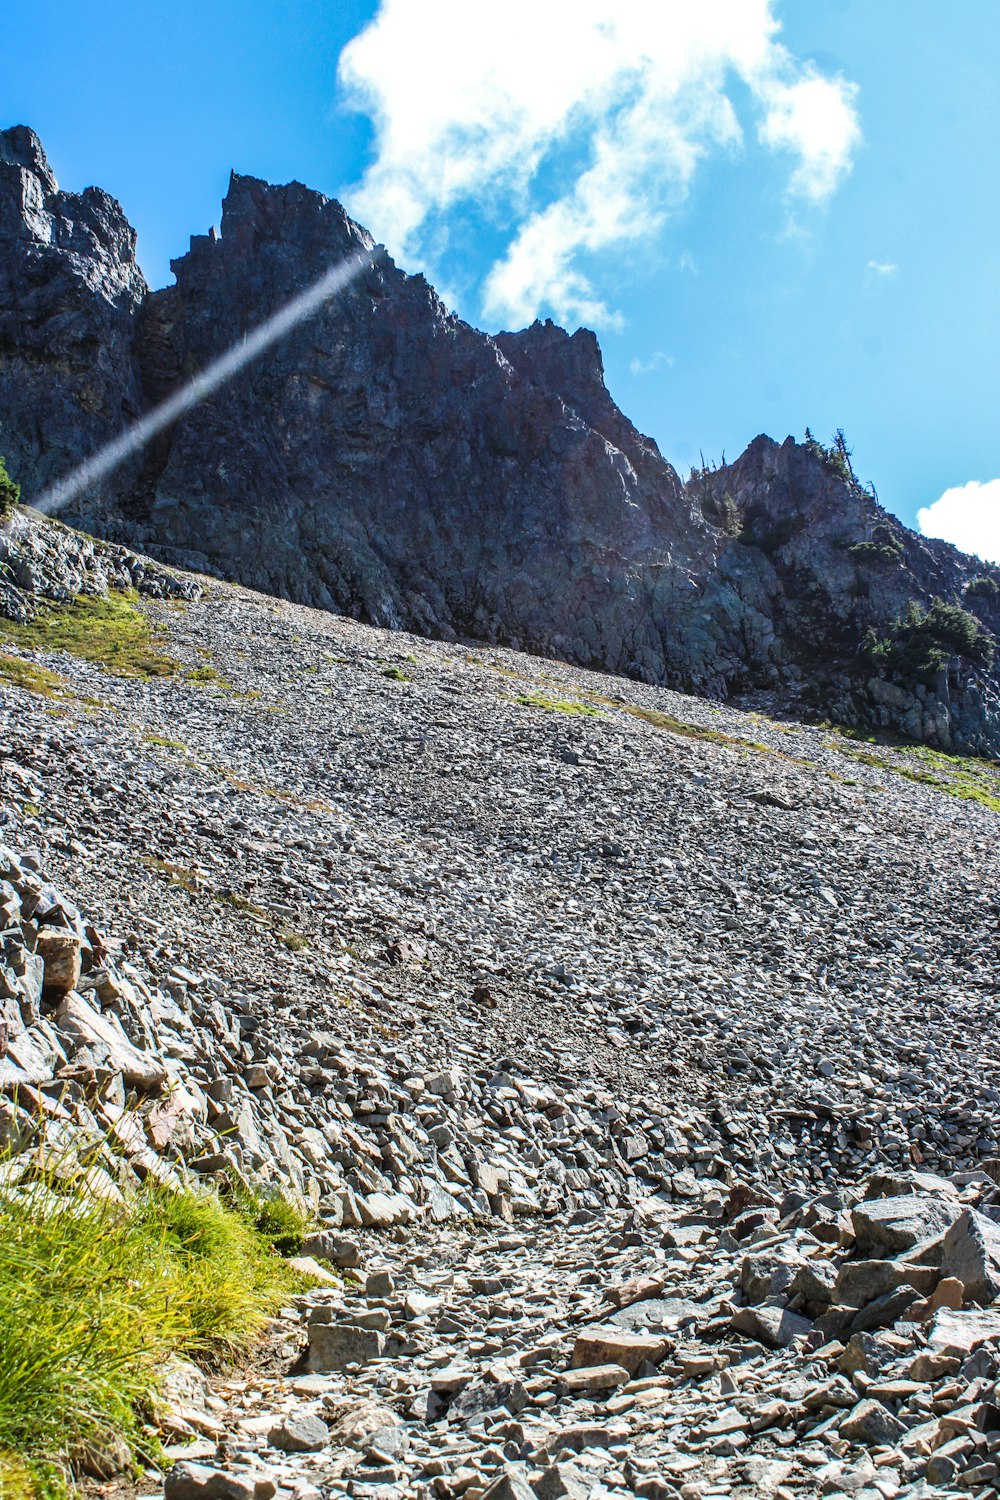 a rocky mountain slope with grass and rocks